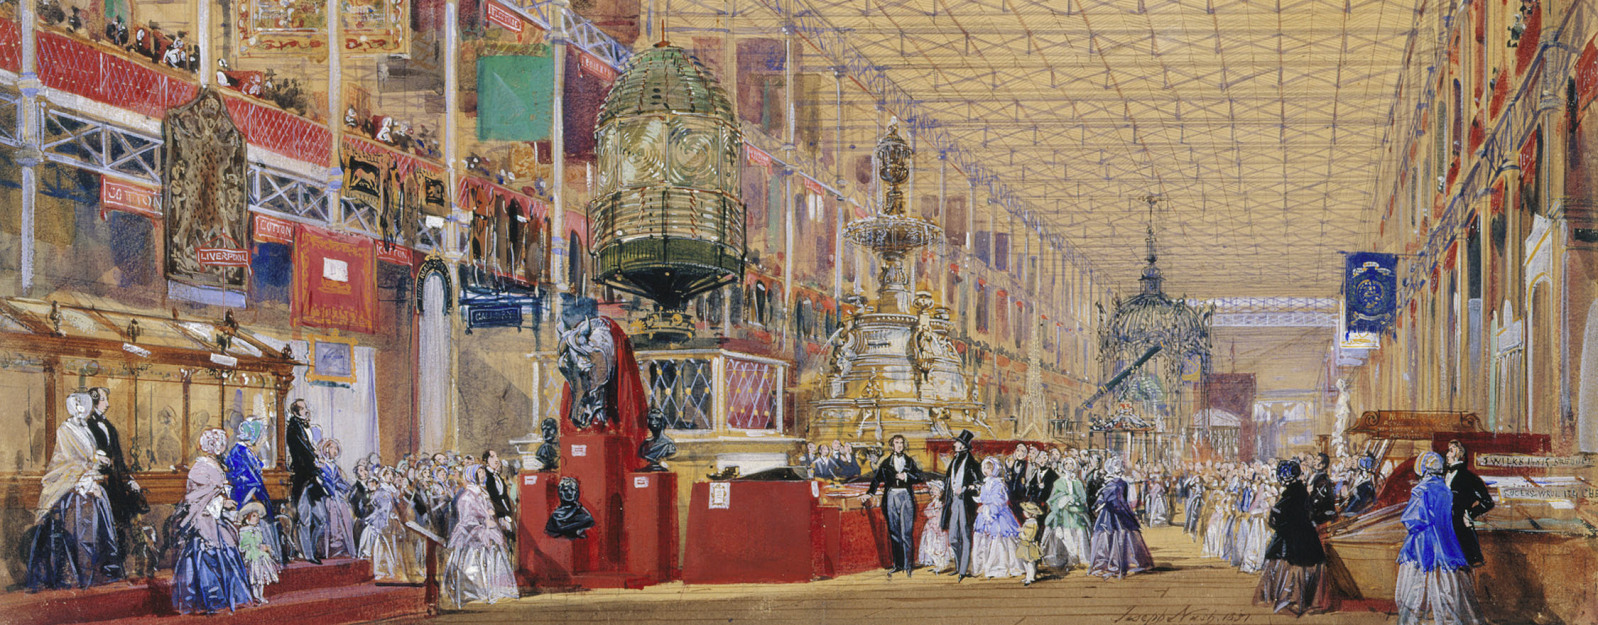 The Great Exhibition of 1851: the British Nave dated 1851 by Joseph Nash 